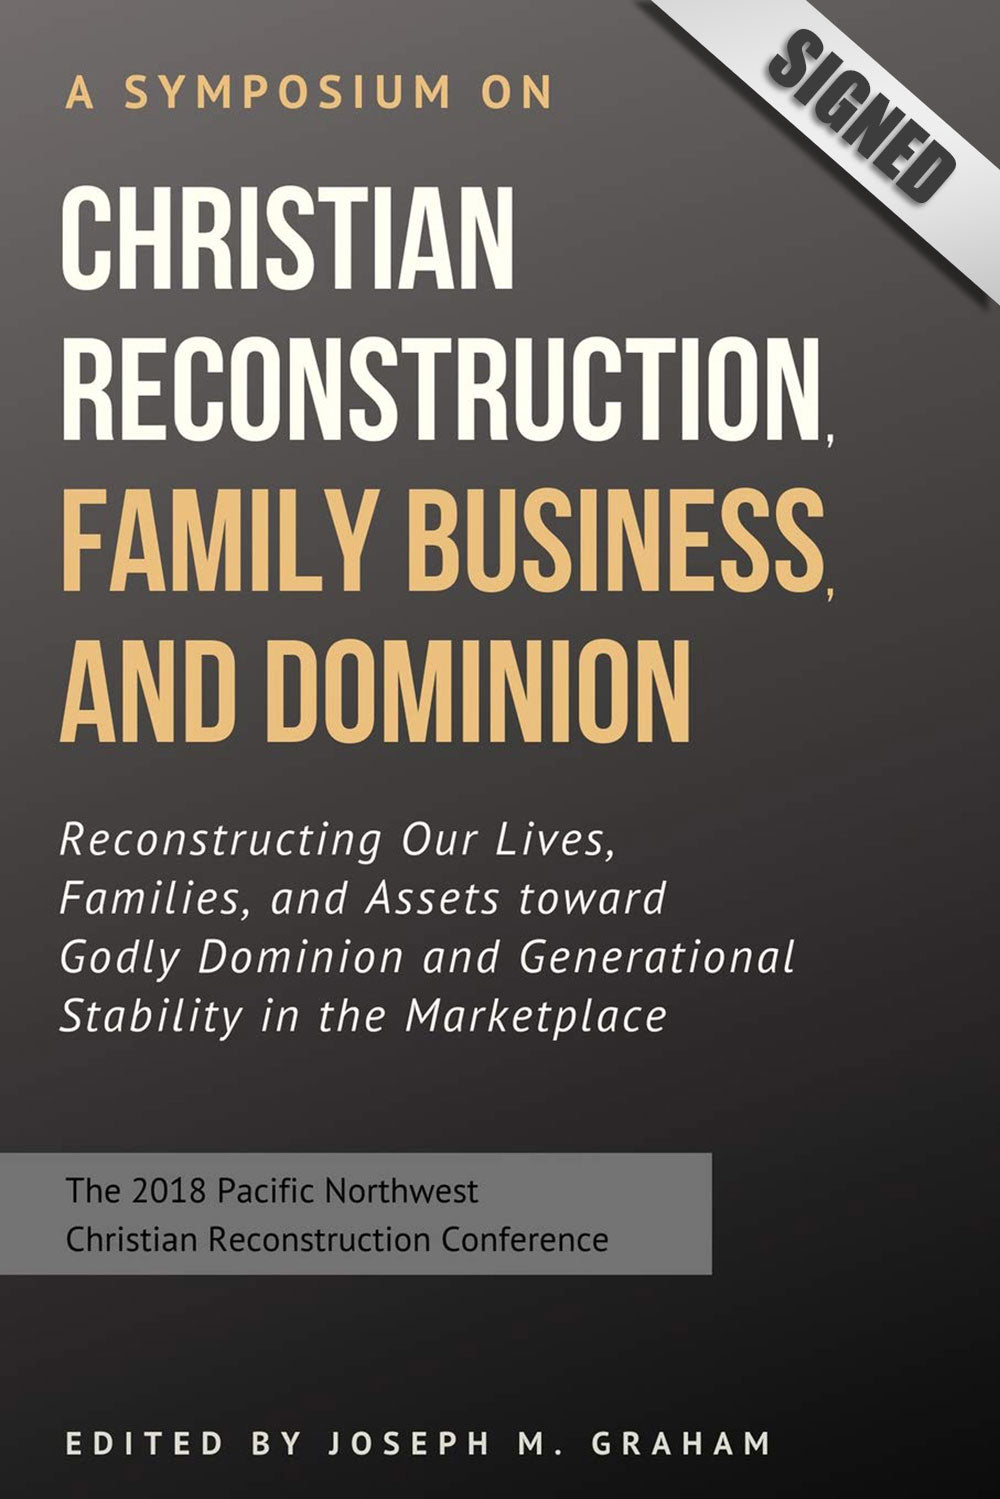 Symposium on Christian Reconstruction, Family Business, and Dominion